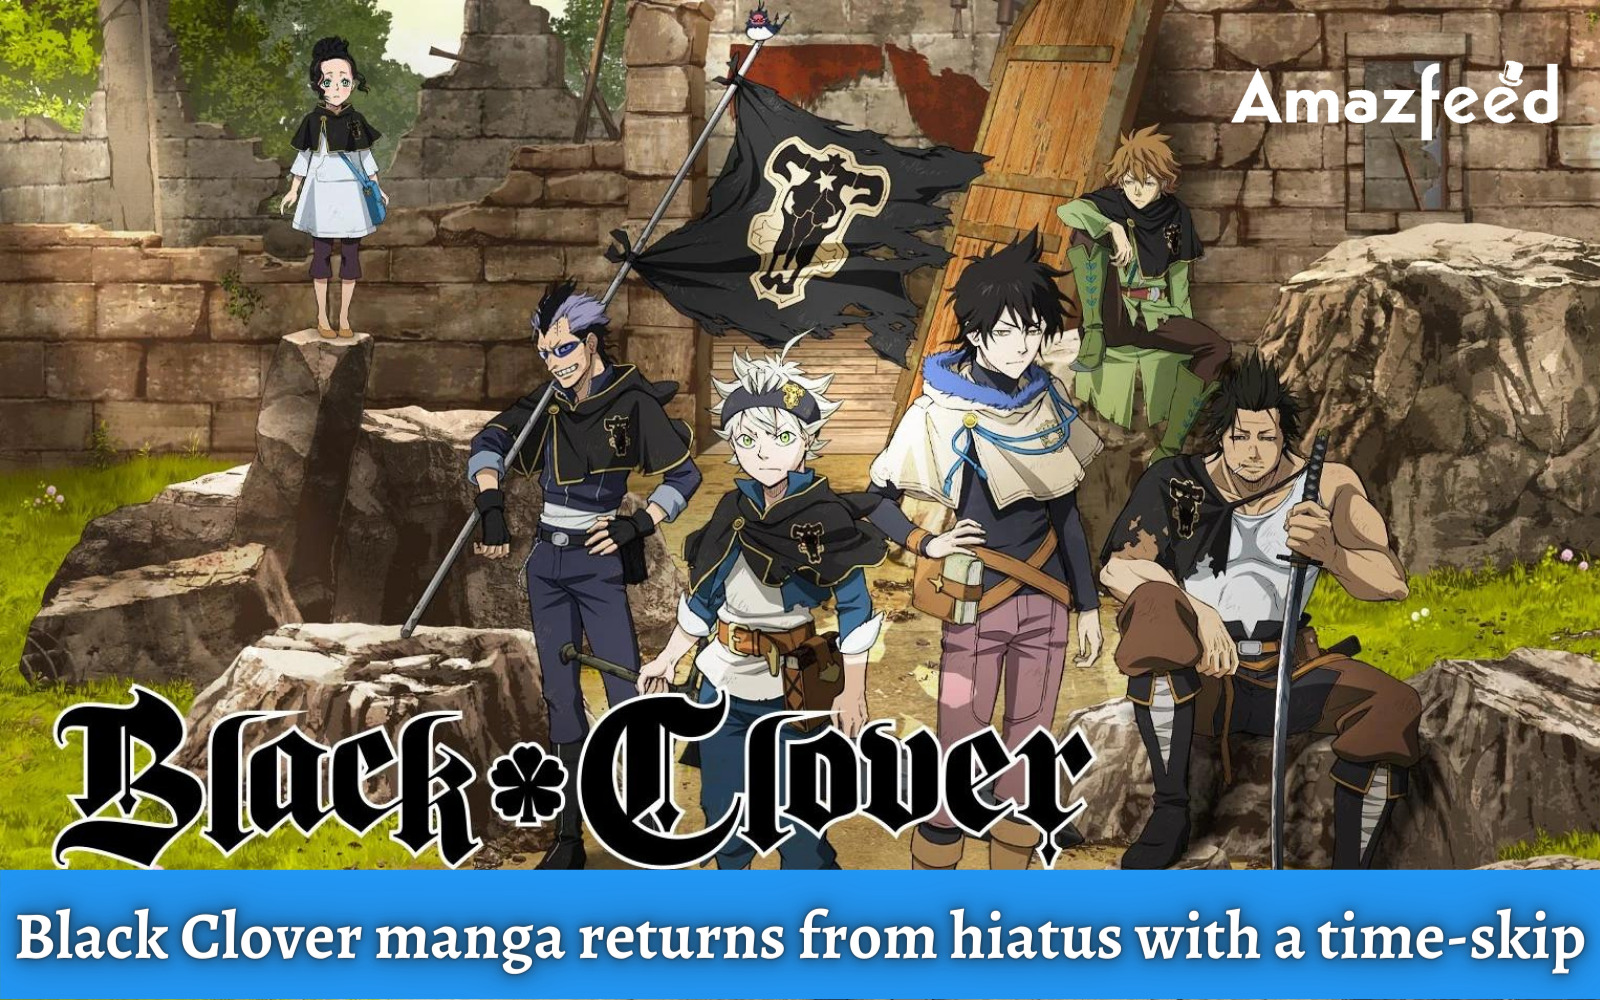 Black Clover Manga Returns From Hiatus With A Time-Skip, Black Clover's  Final Arc Will Have A Time-Jump Of One Year » Amazfeed